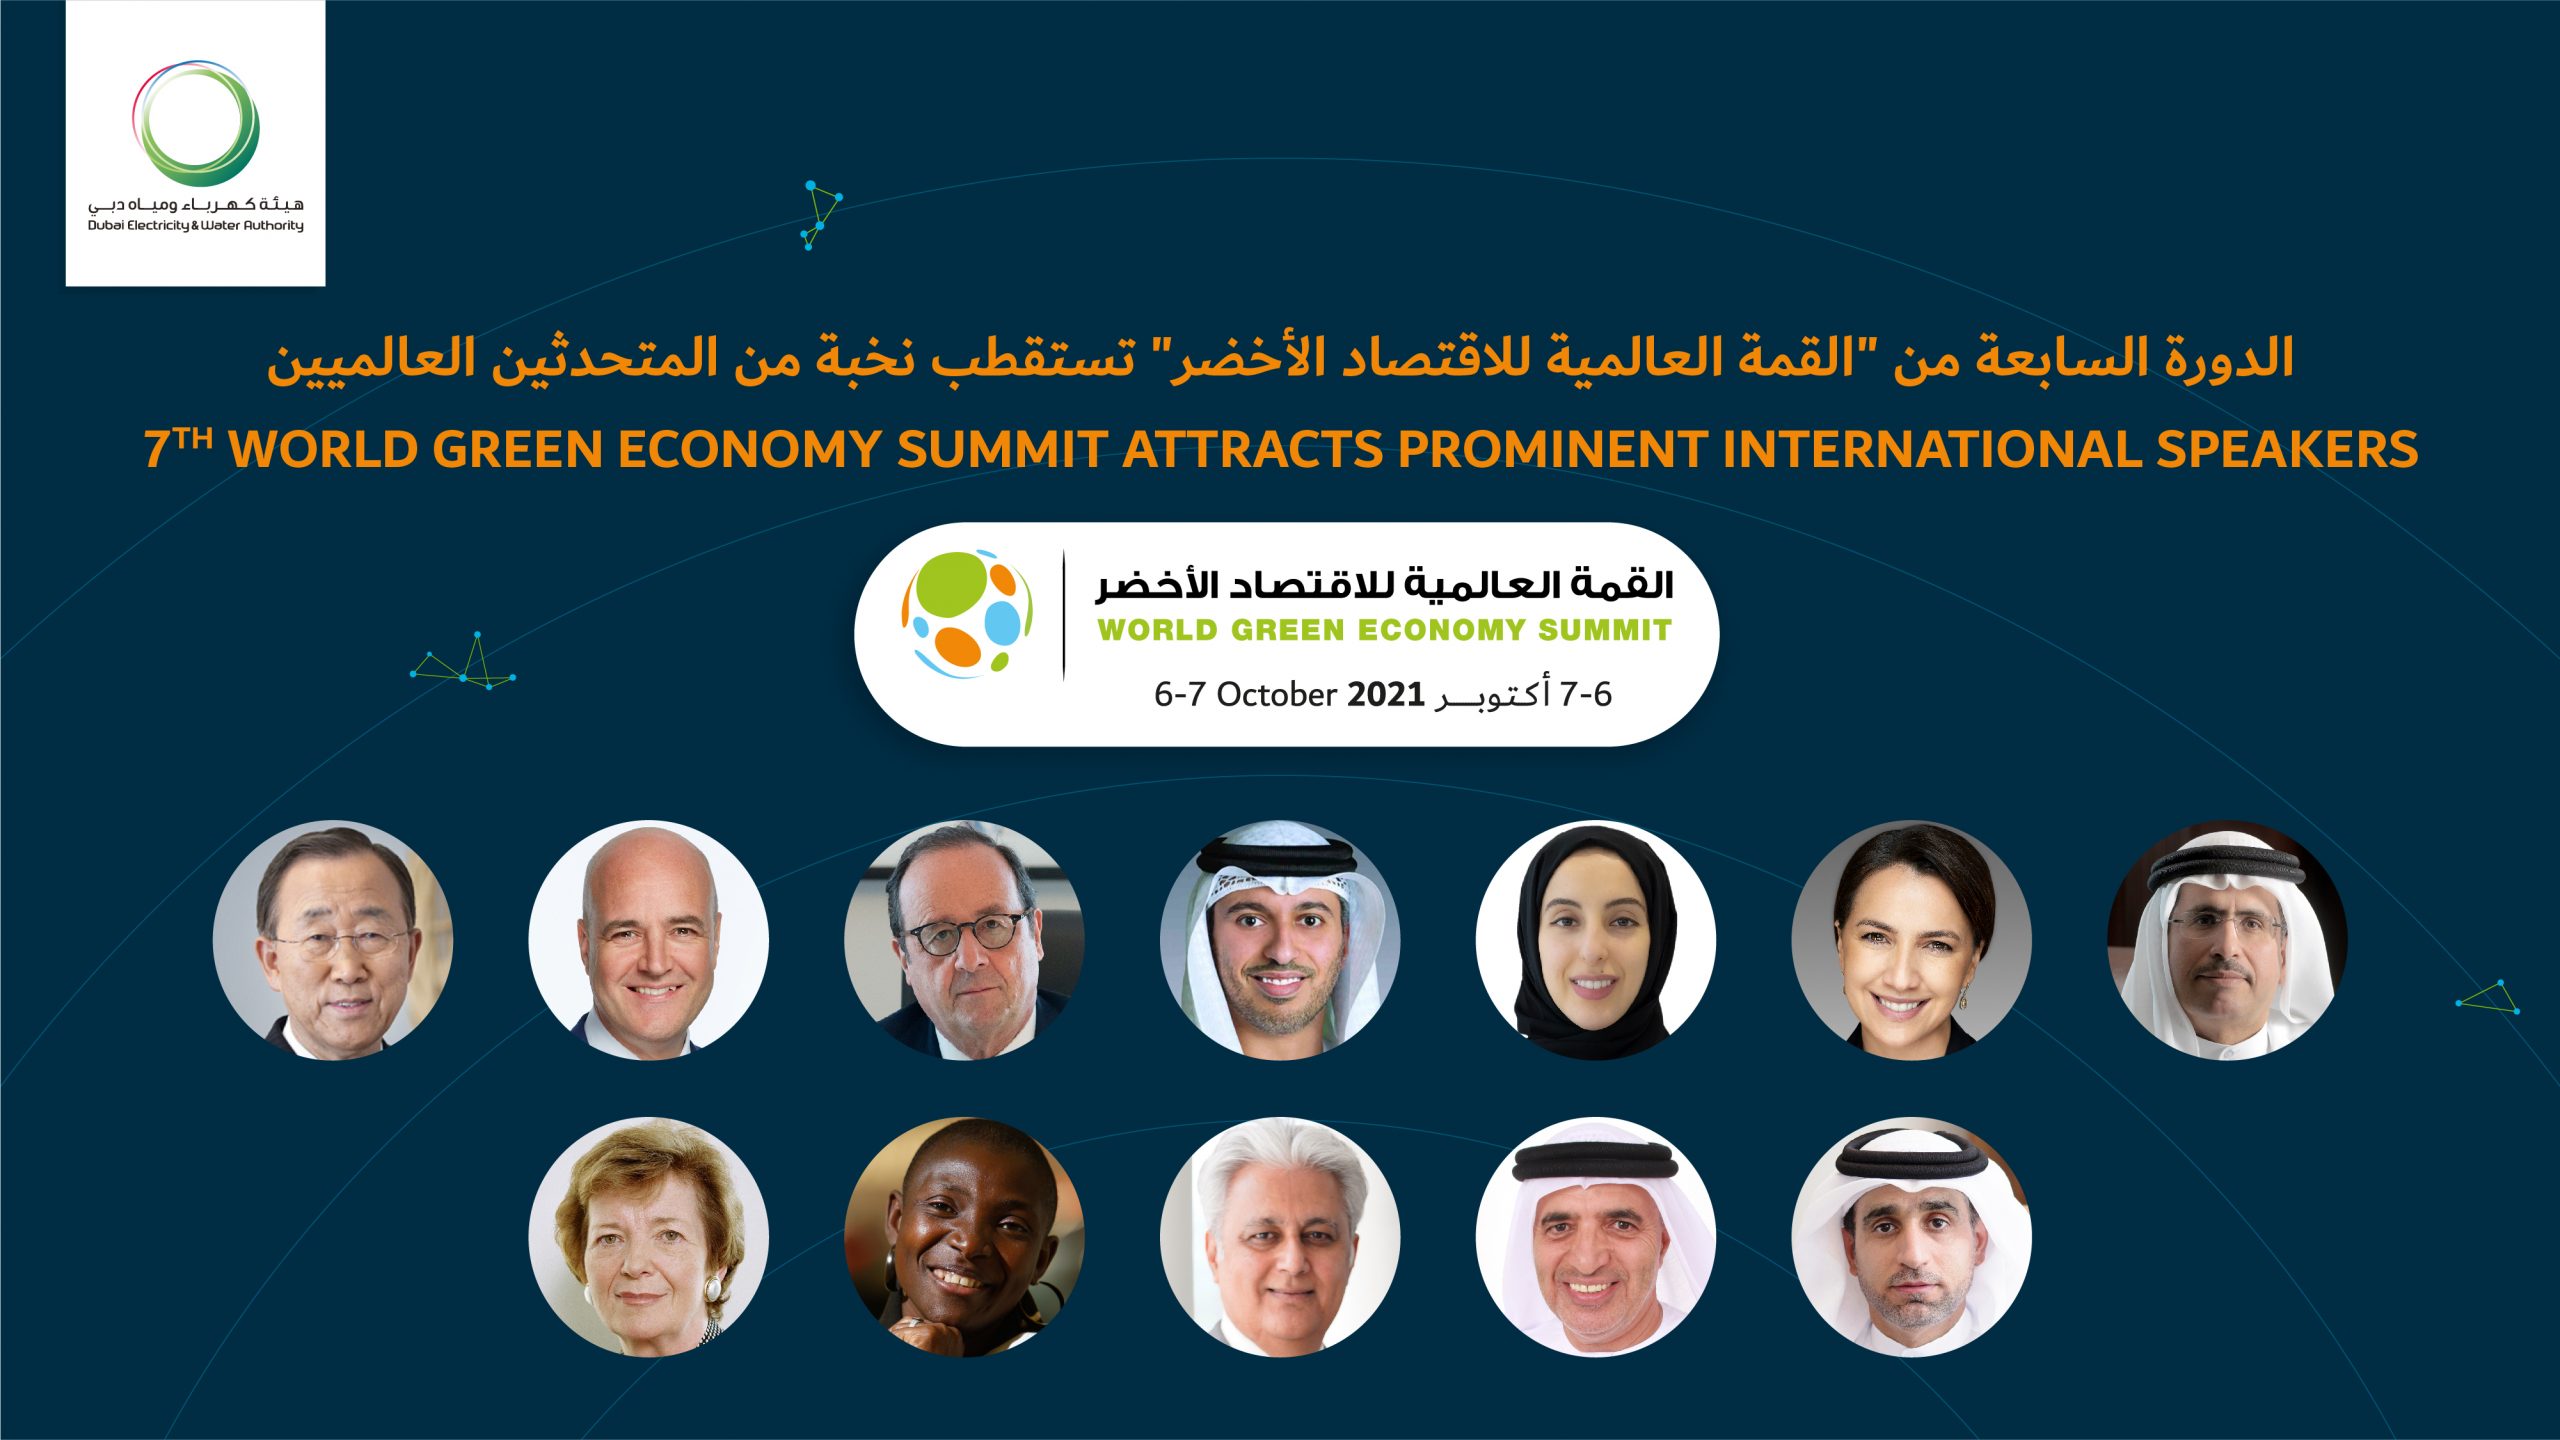 Seventh Global Green Economy Summit attracts renowned international speakers

